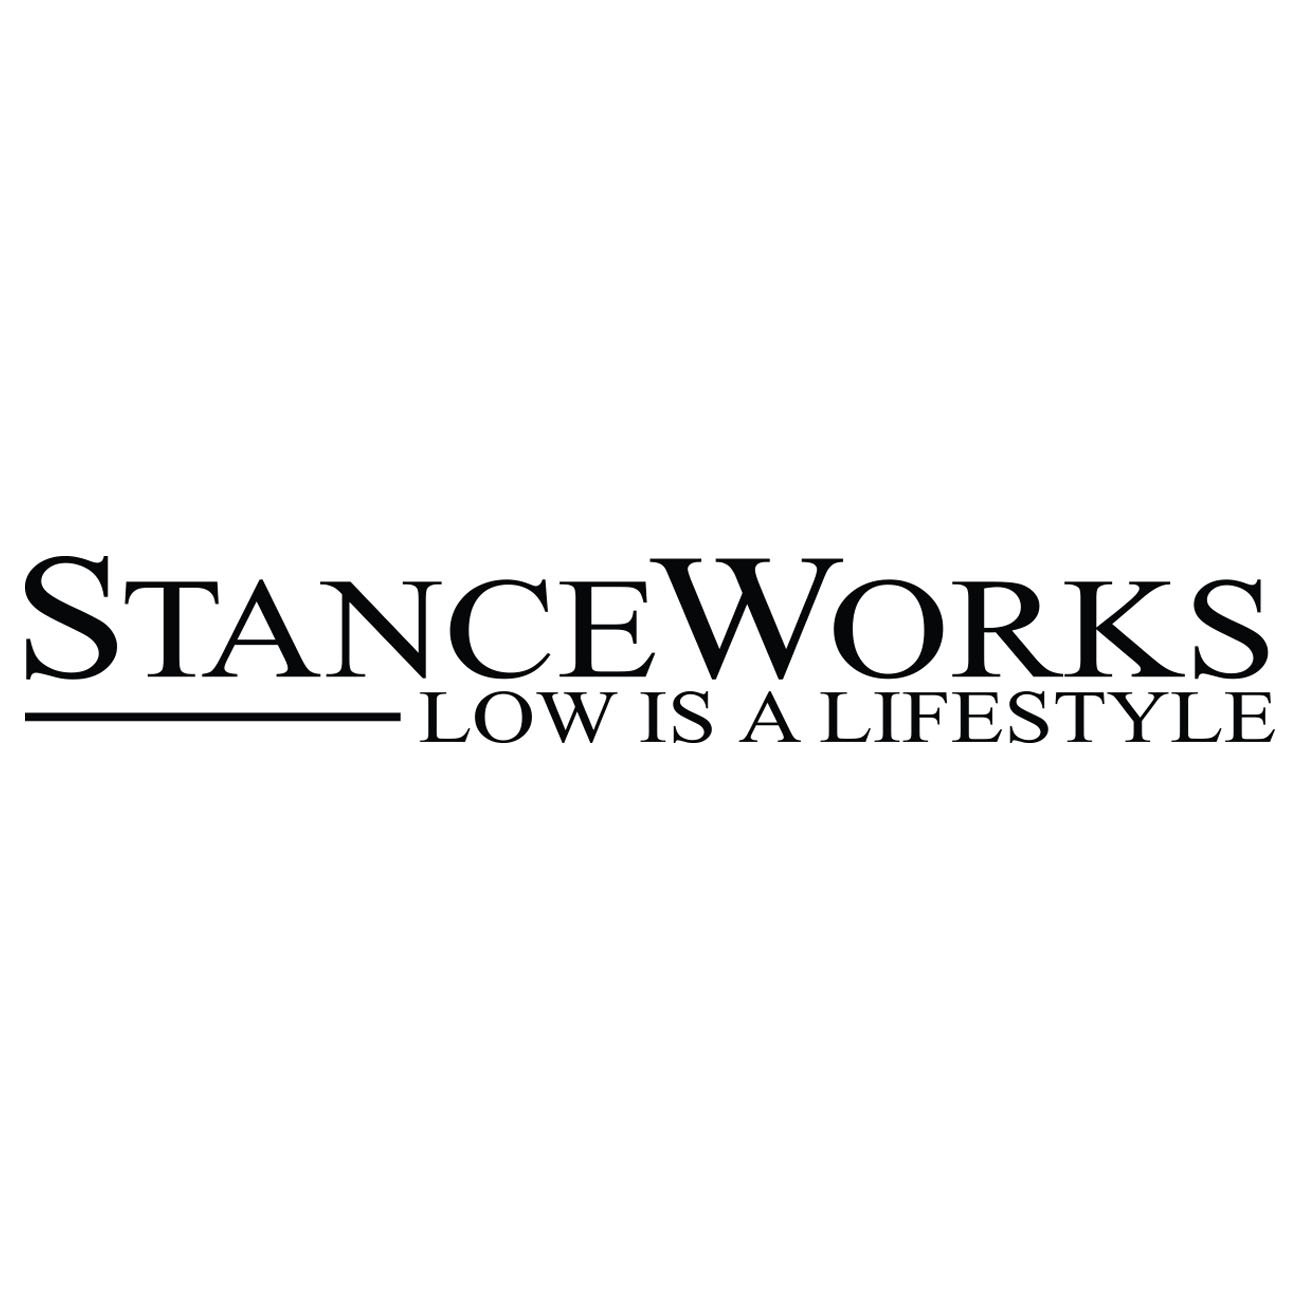 Stance Works logo 1 - Low is a lifestyle